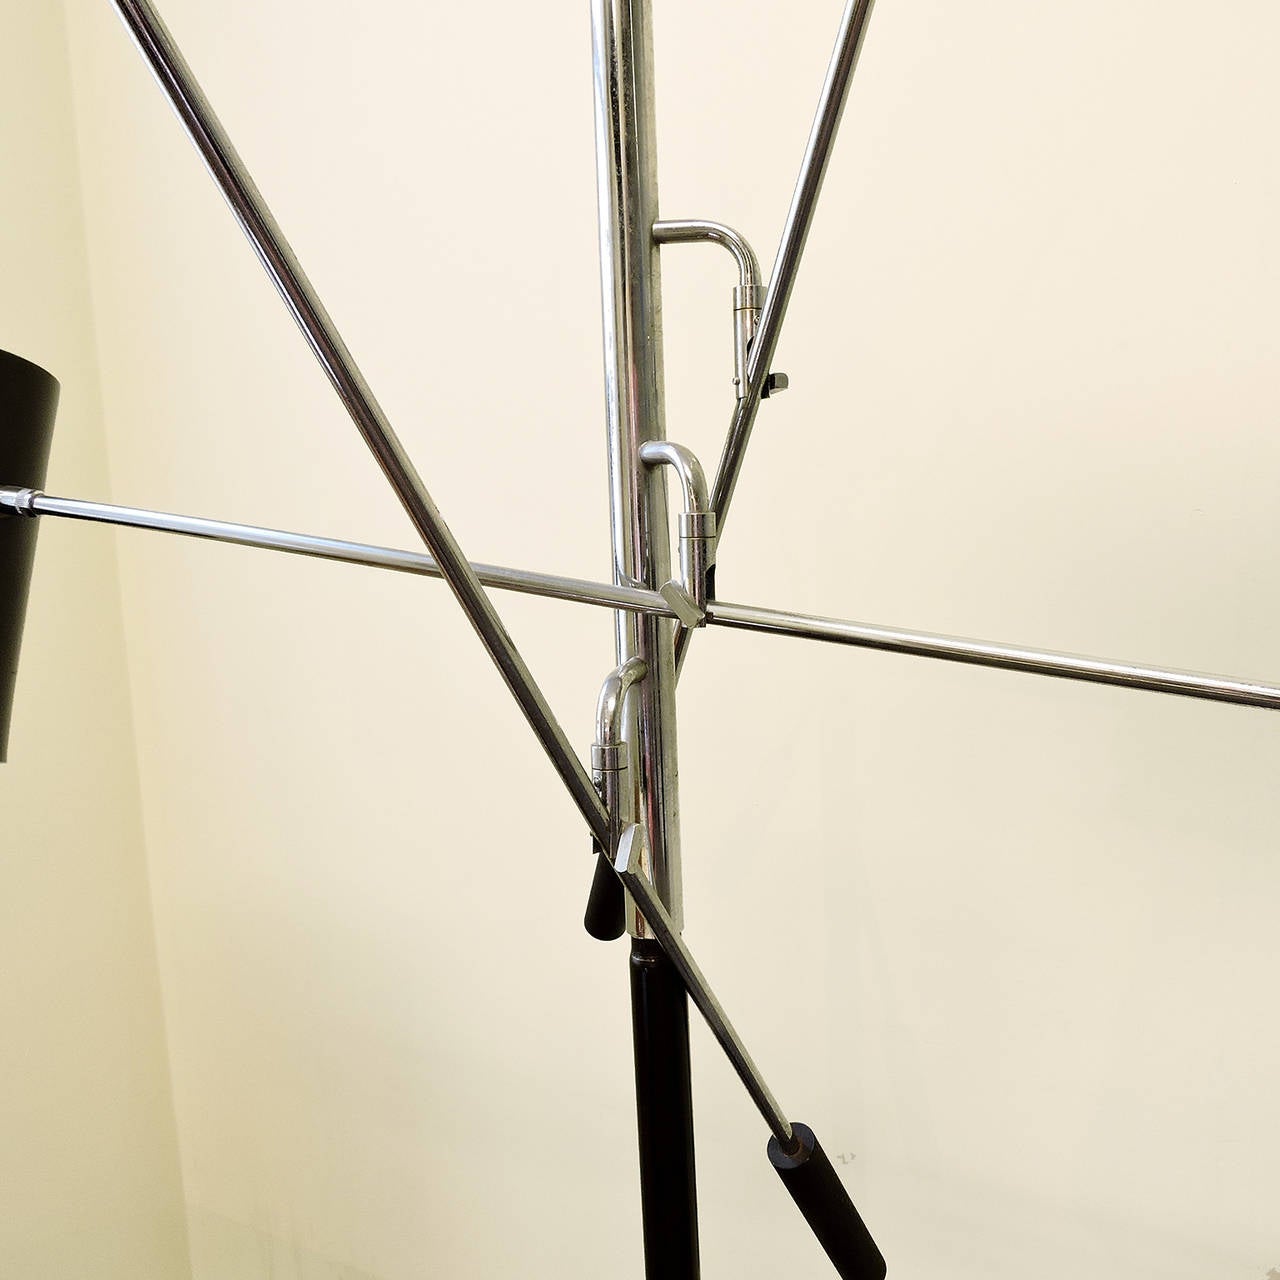 A fine Mid-Century Modern three-light floor lamp. Standing patinated metal post features three chrome adjusting poles with black enamel painted spotlight shades. Possibly by Arredoluce. Dimensions: Height 70 inches, base 12 inches diameter,